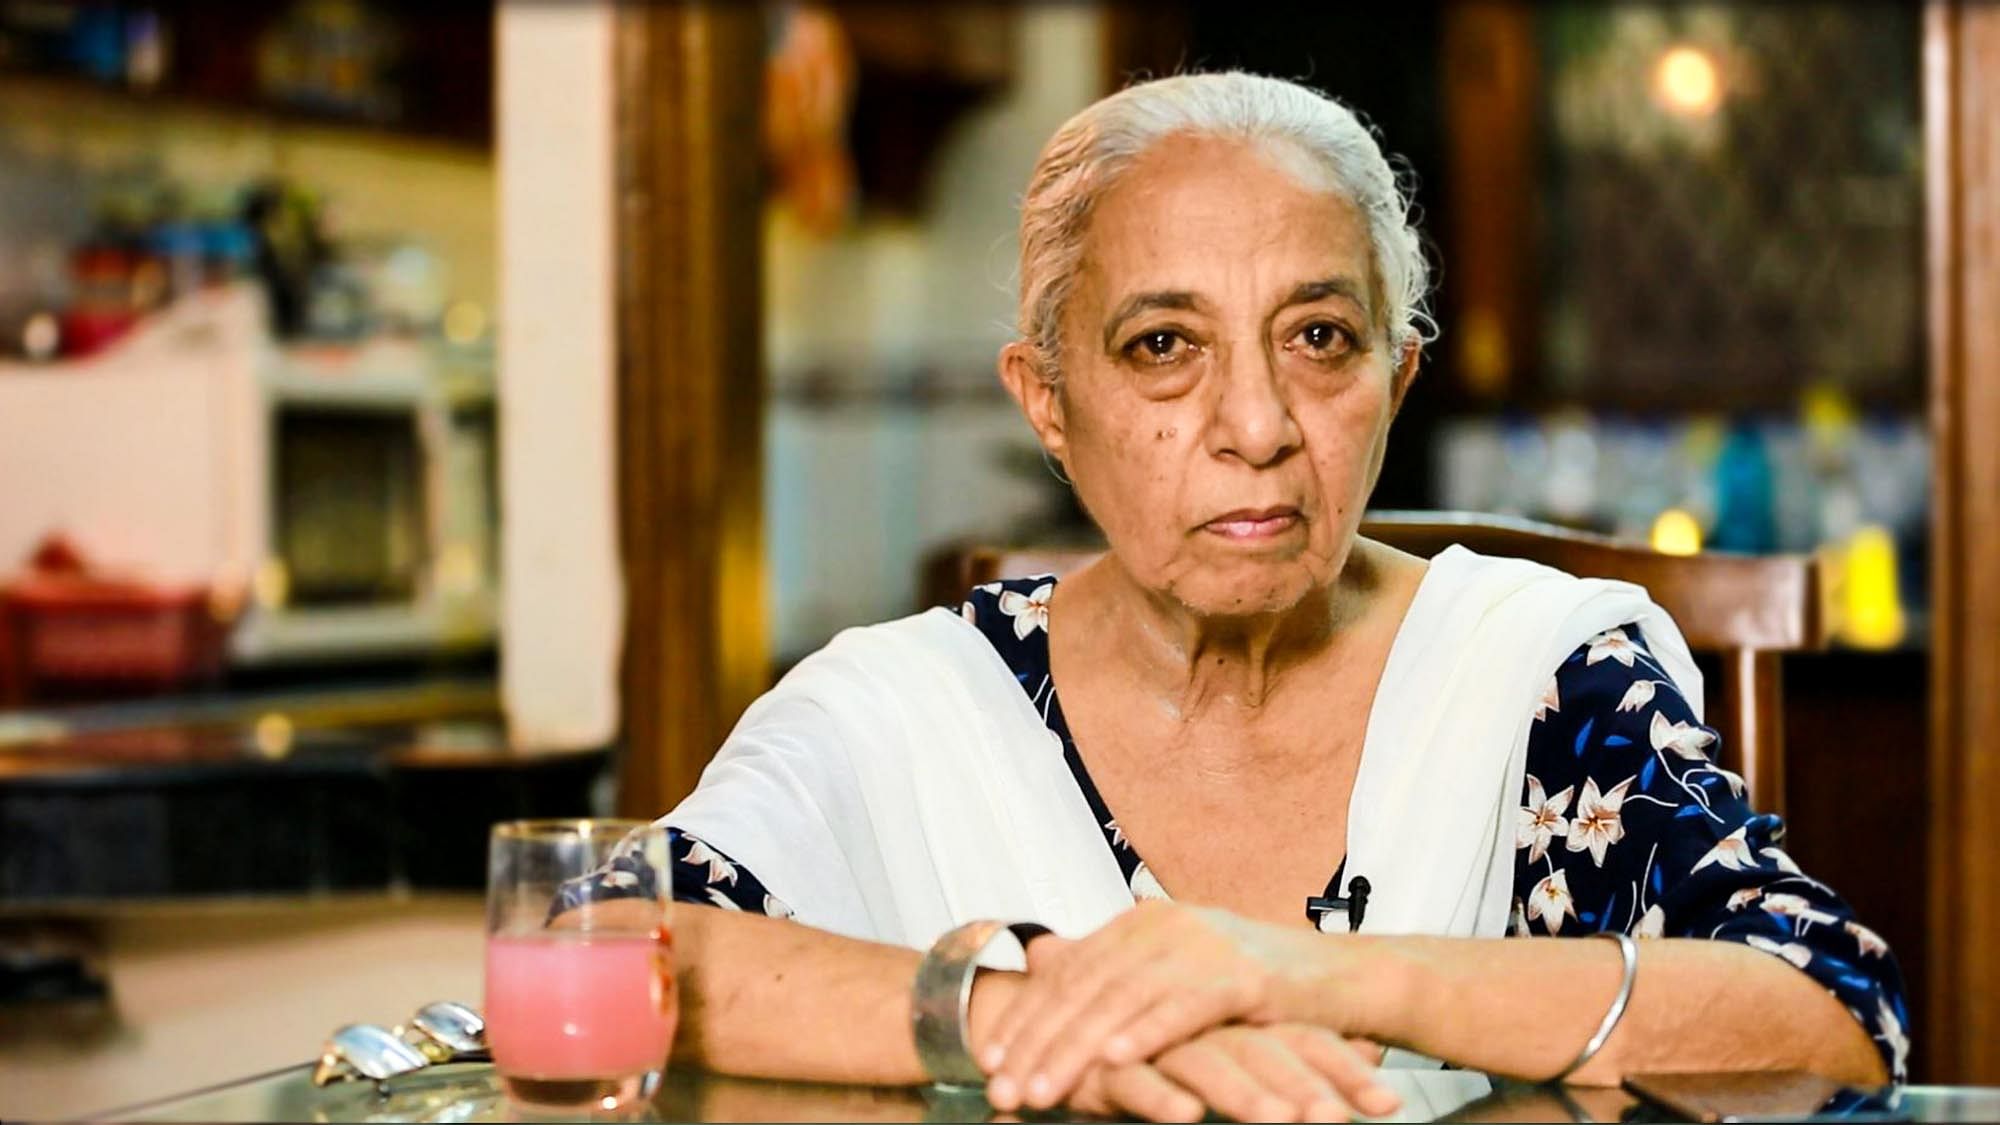 Surinder Kaur is in her 70s – she says she has been at the receiving end of emotional abuse from her own son. 